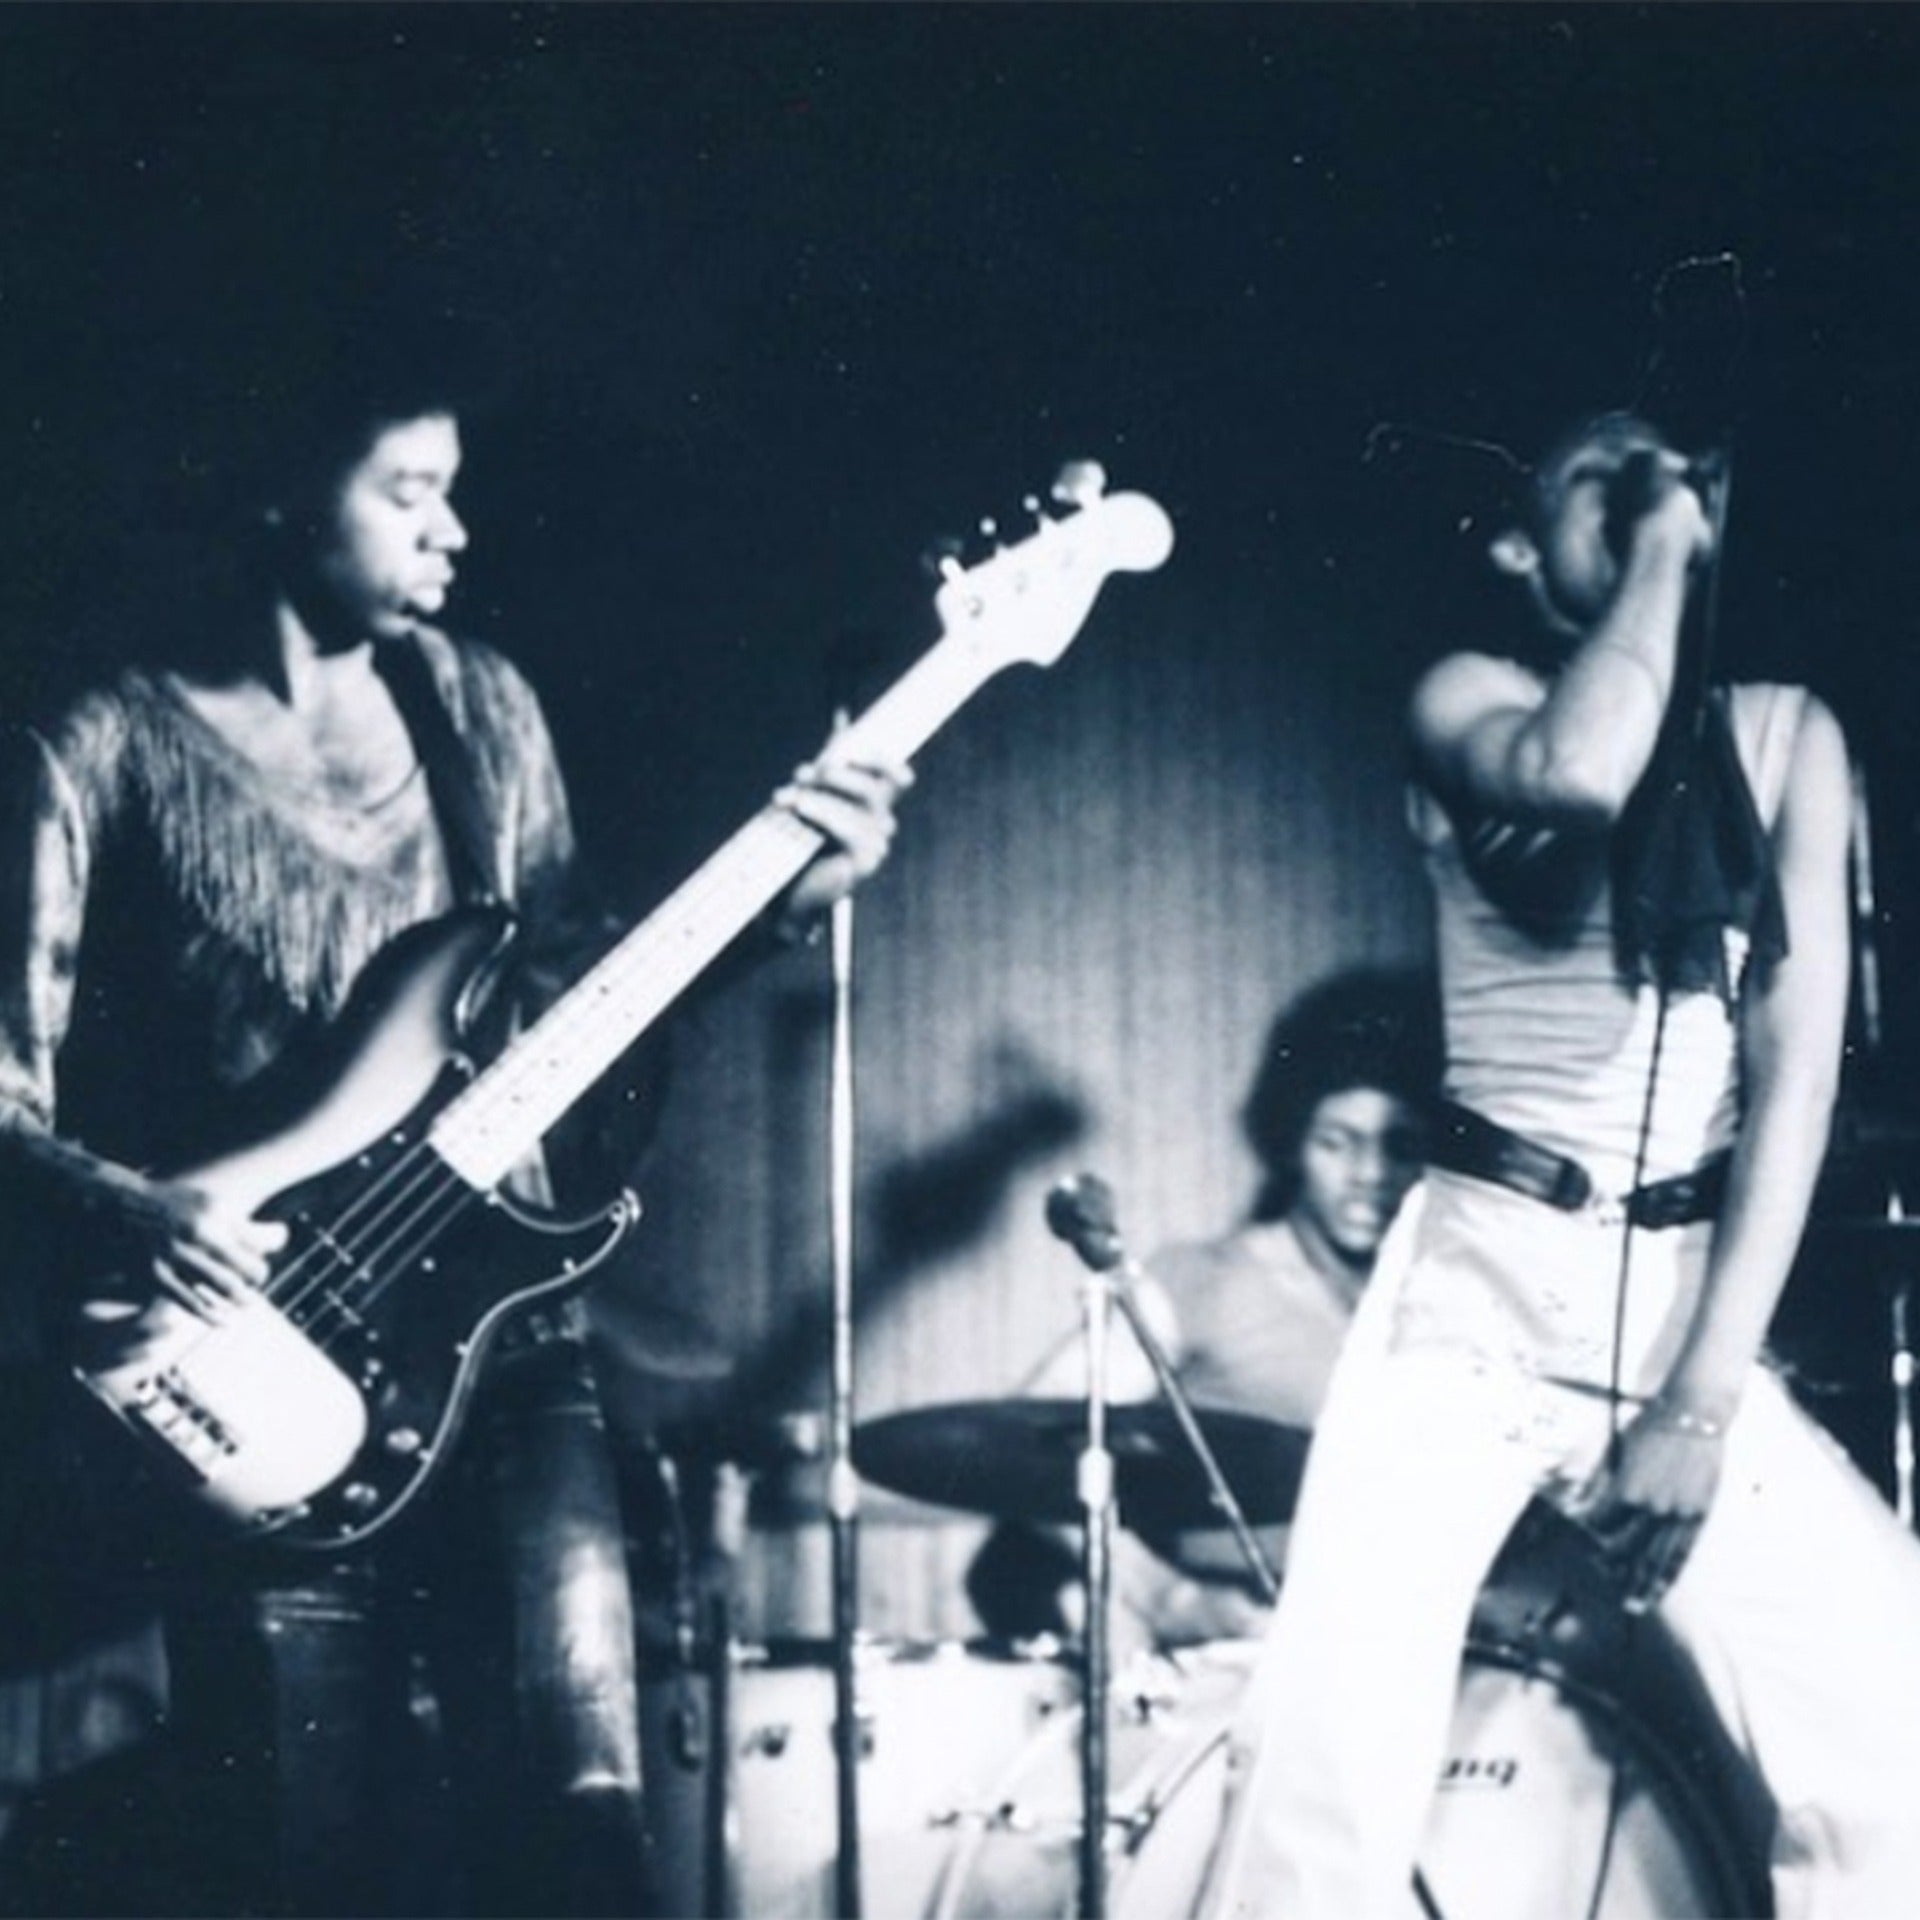 Black and white photo of a band performing on stage